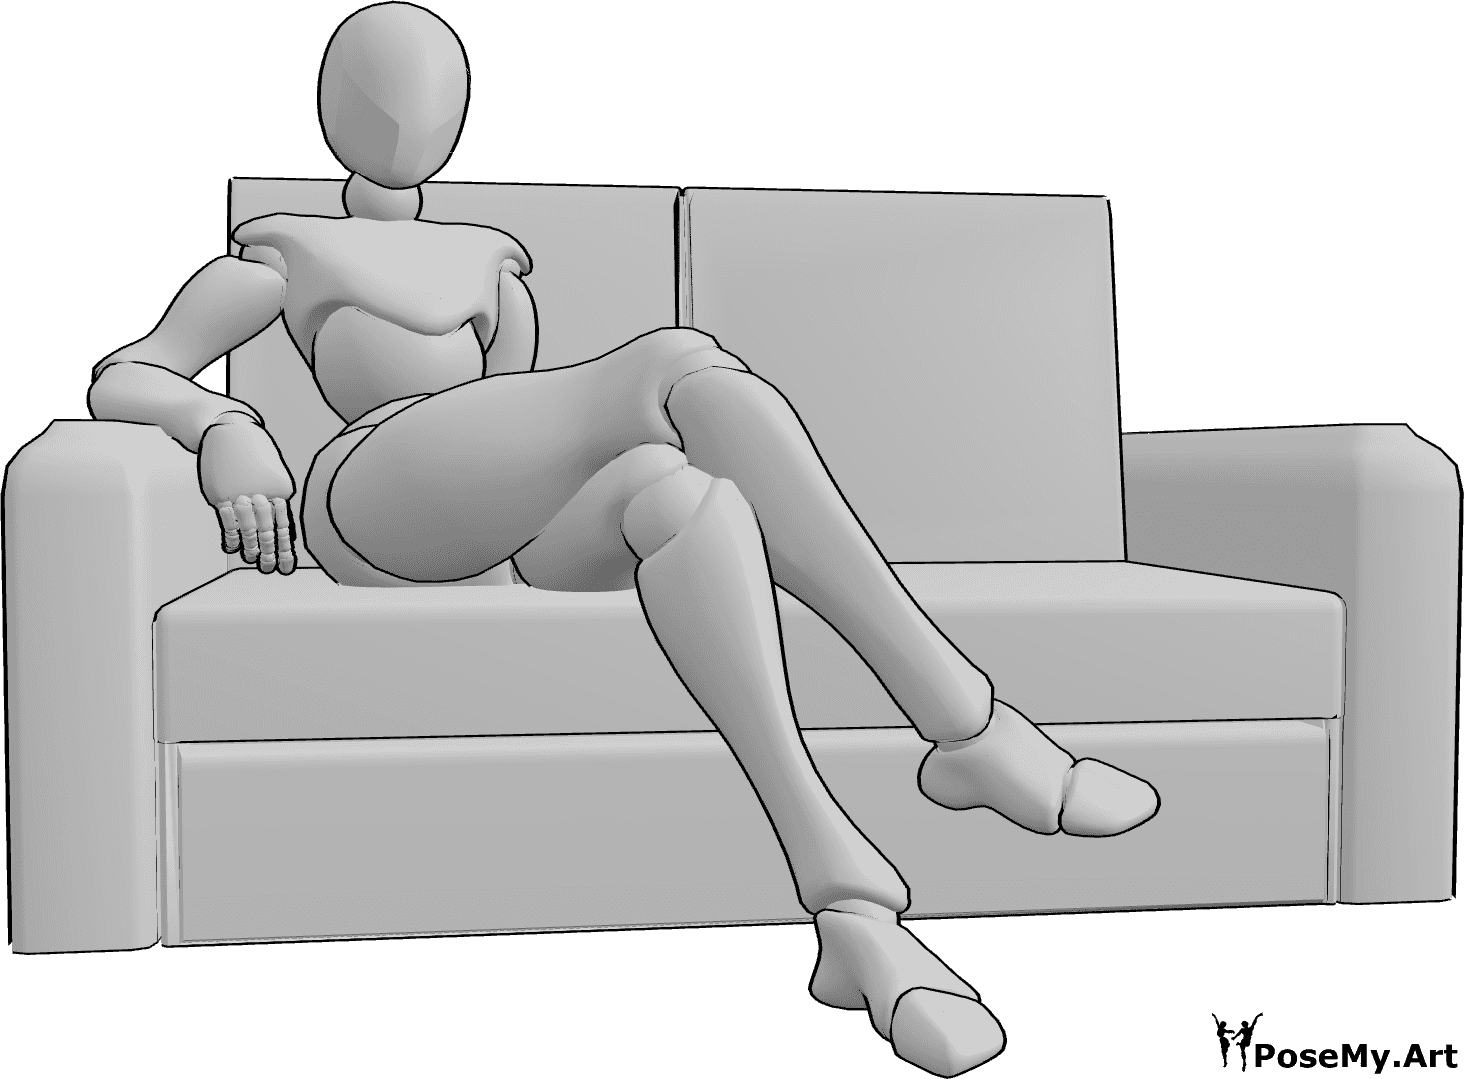 Pose Reference- Comfortable sitting couch pose - Female is sitting comfortably on the couch with her legs crossed